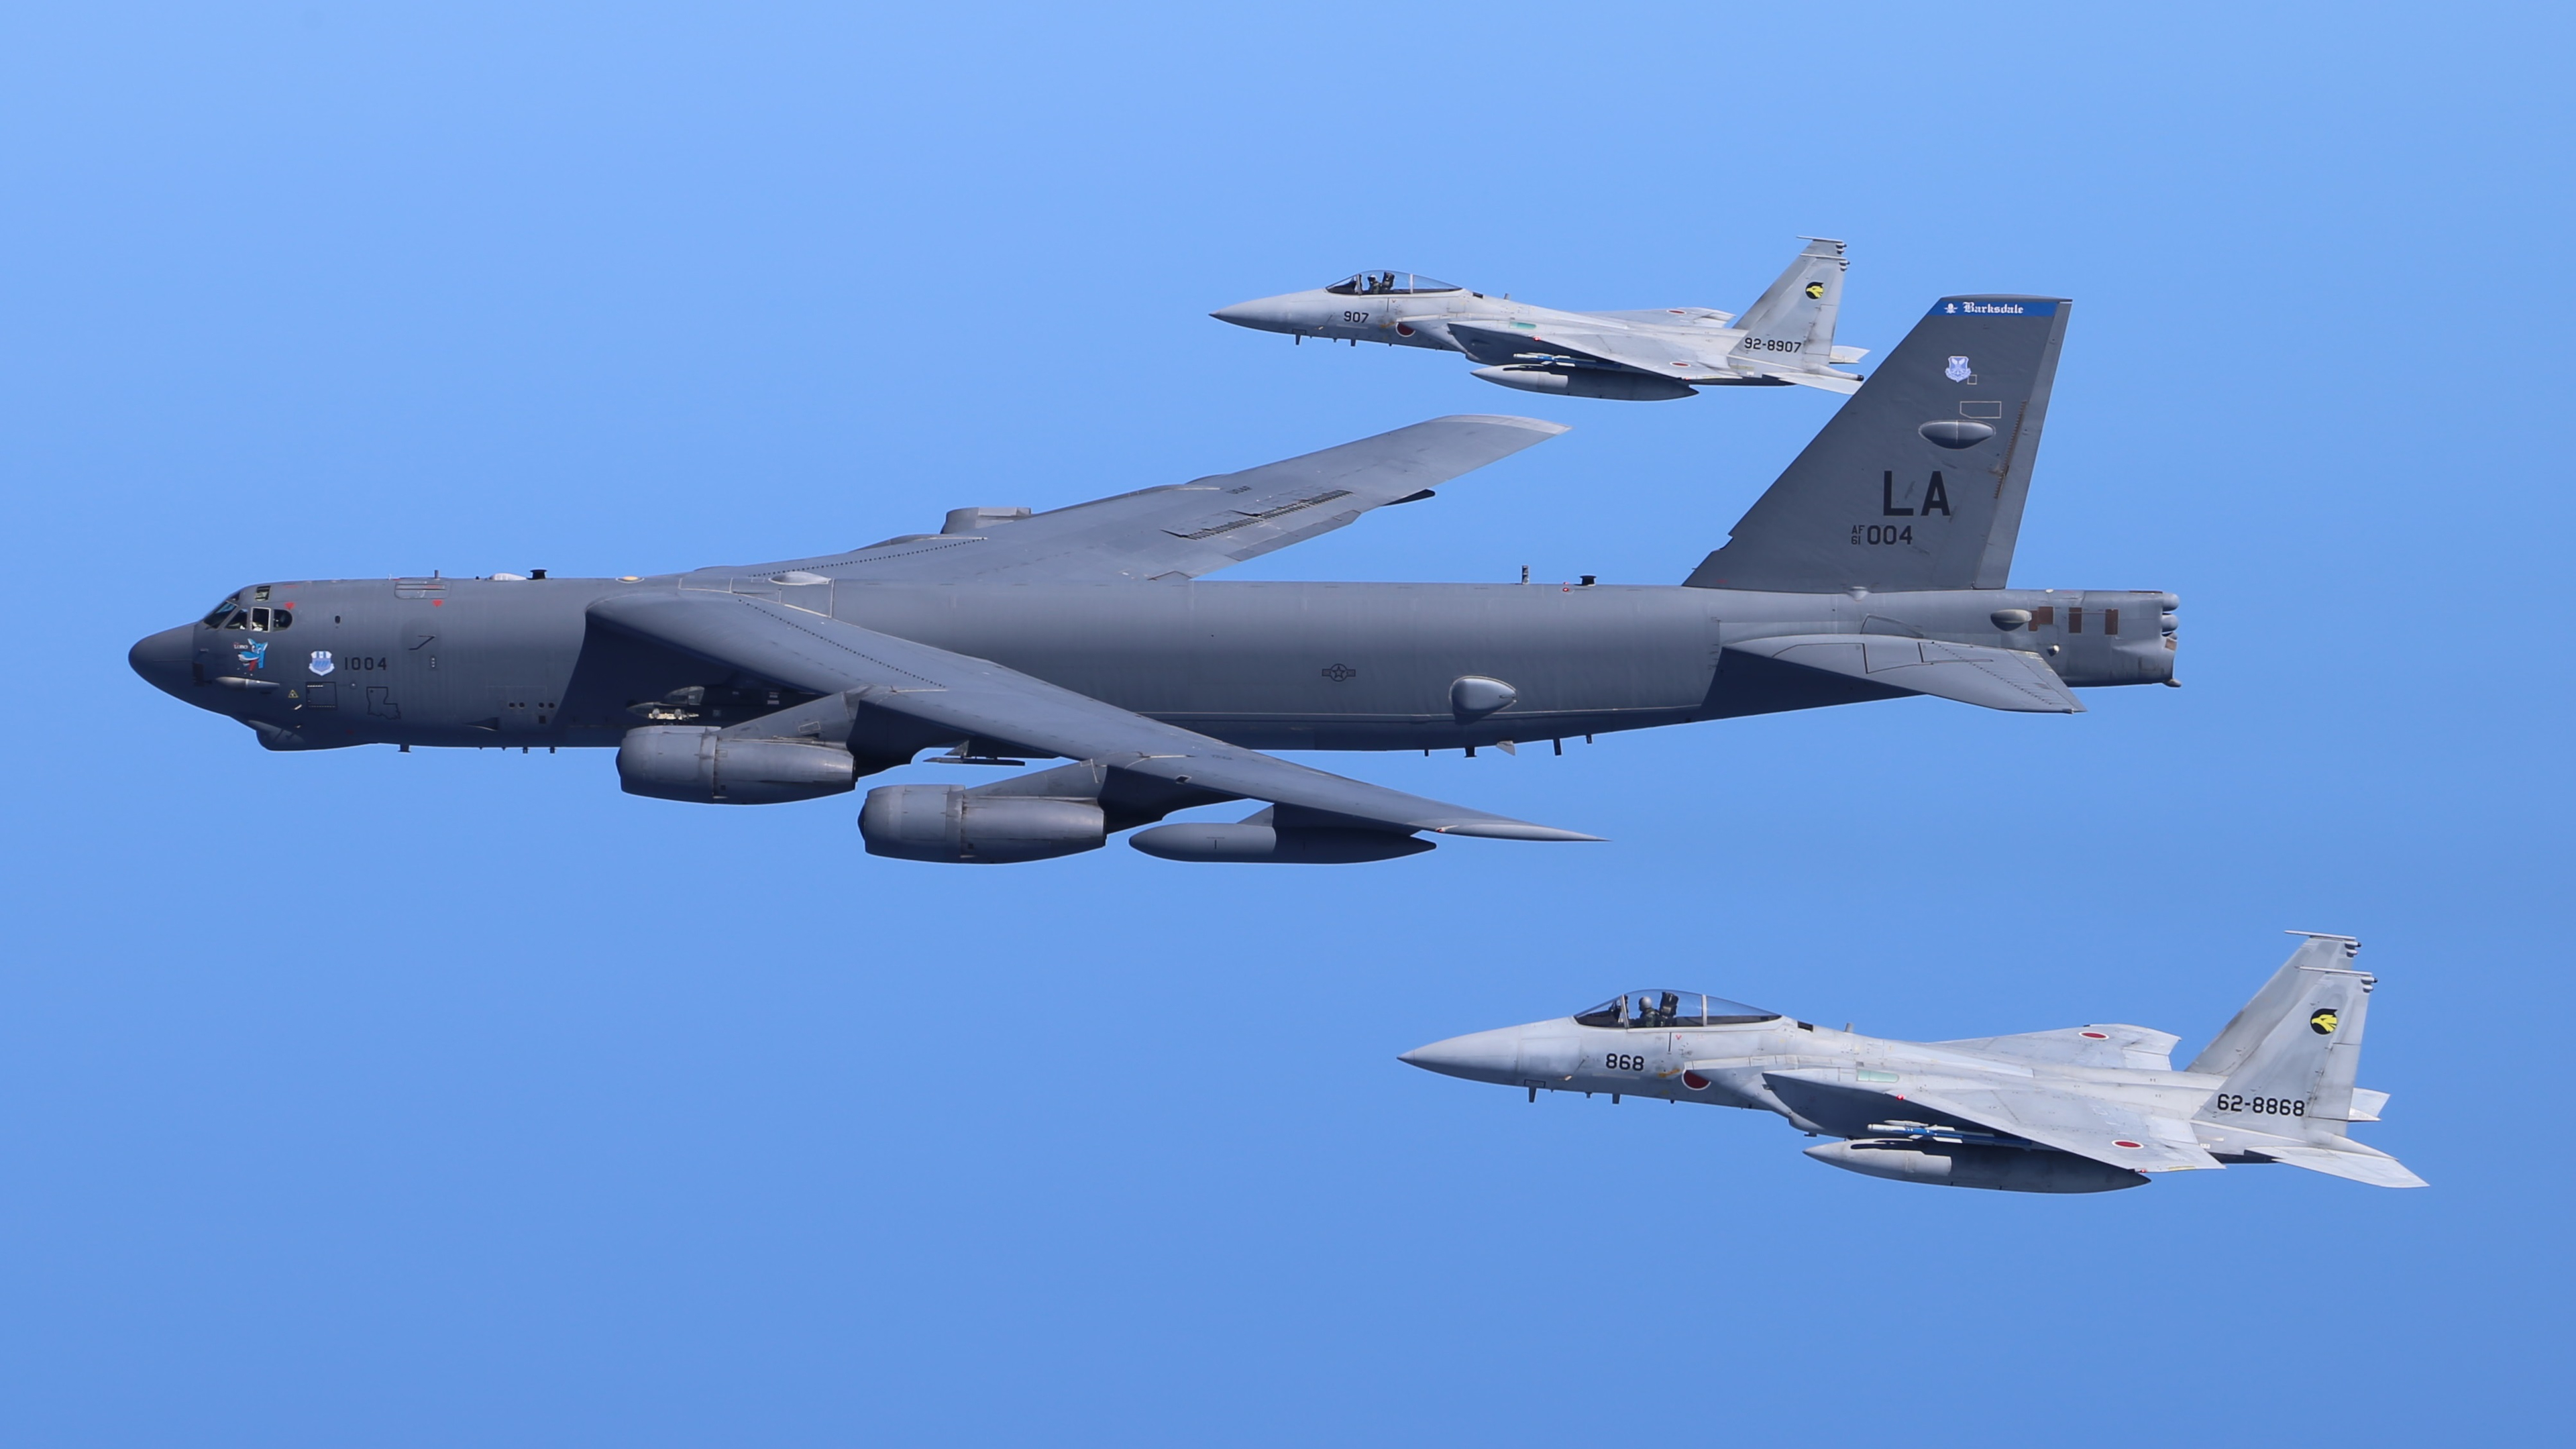 Boeing B 52 Stratofortress McDonnell Douglas F 15 Eagle Military Aircraft Military Aircraft Jet Figh 3840x2160